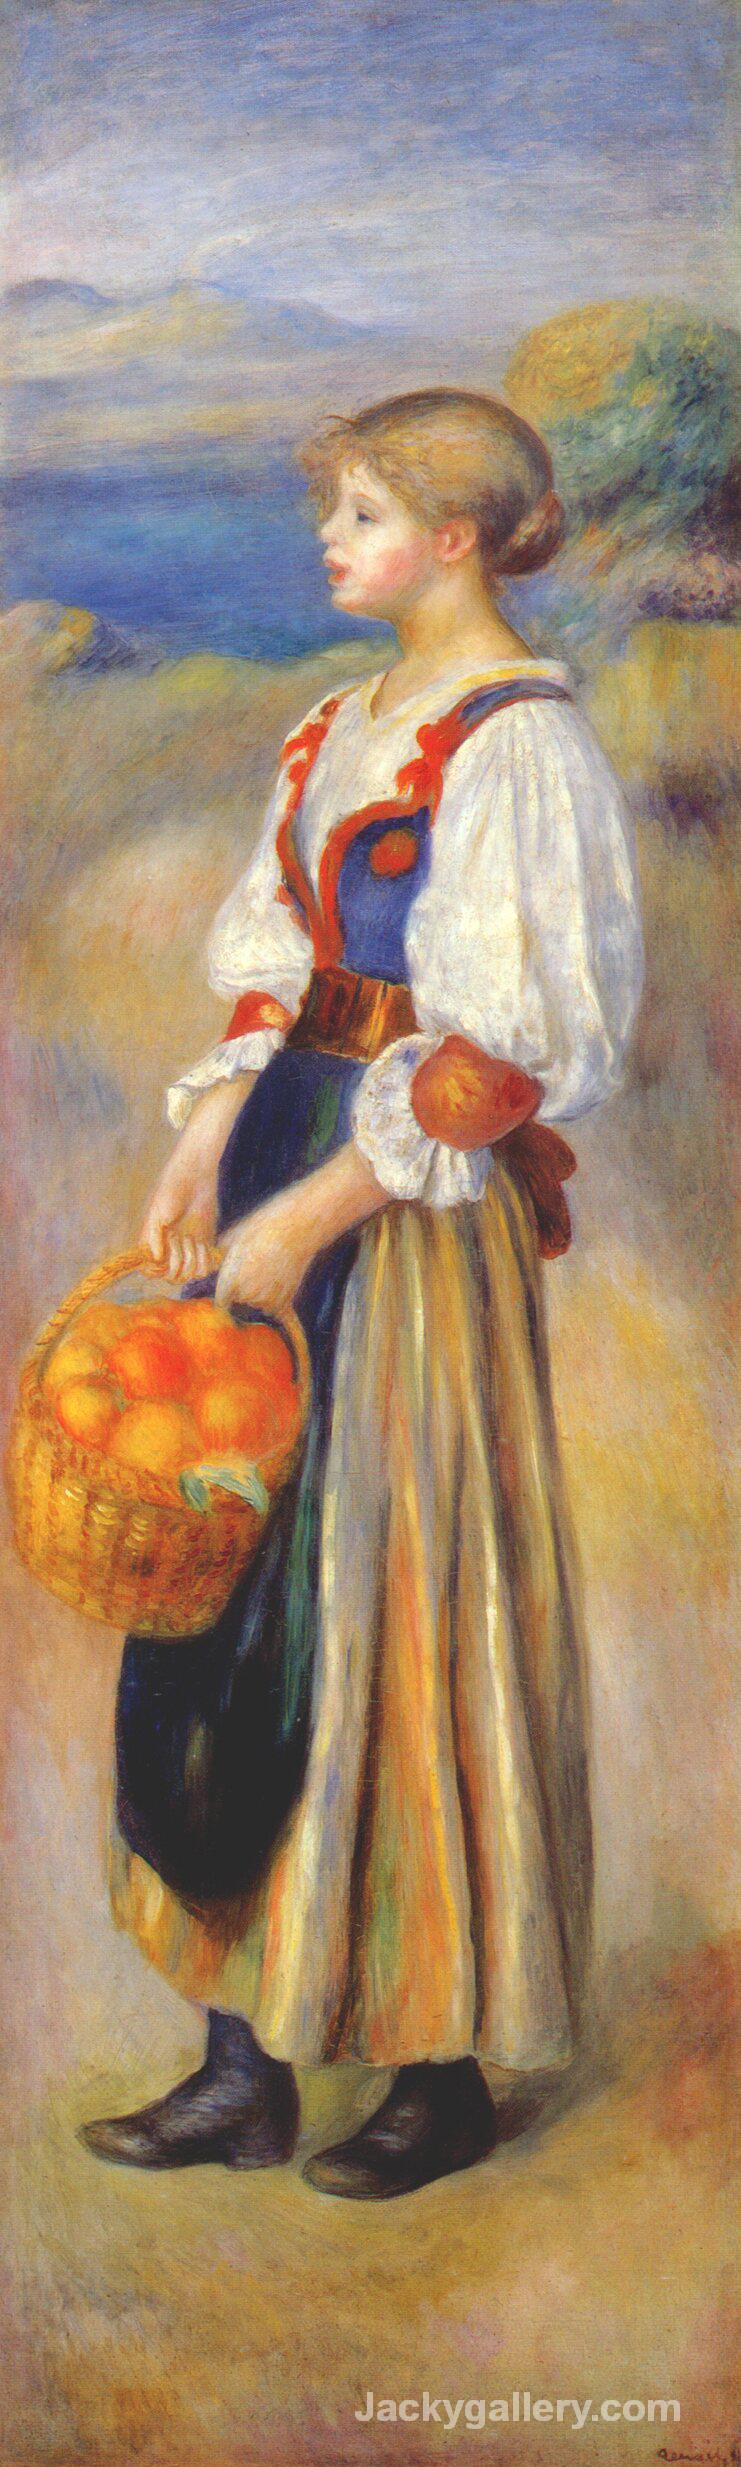 Girl with a basket of oranges by Pierre Auguste Renoir paintings reproduction